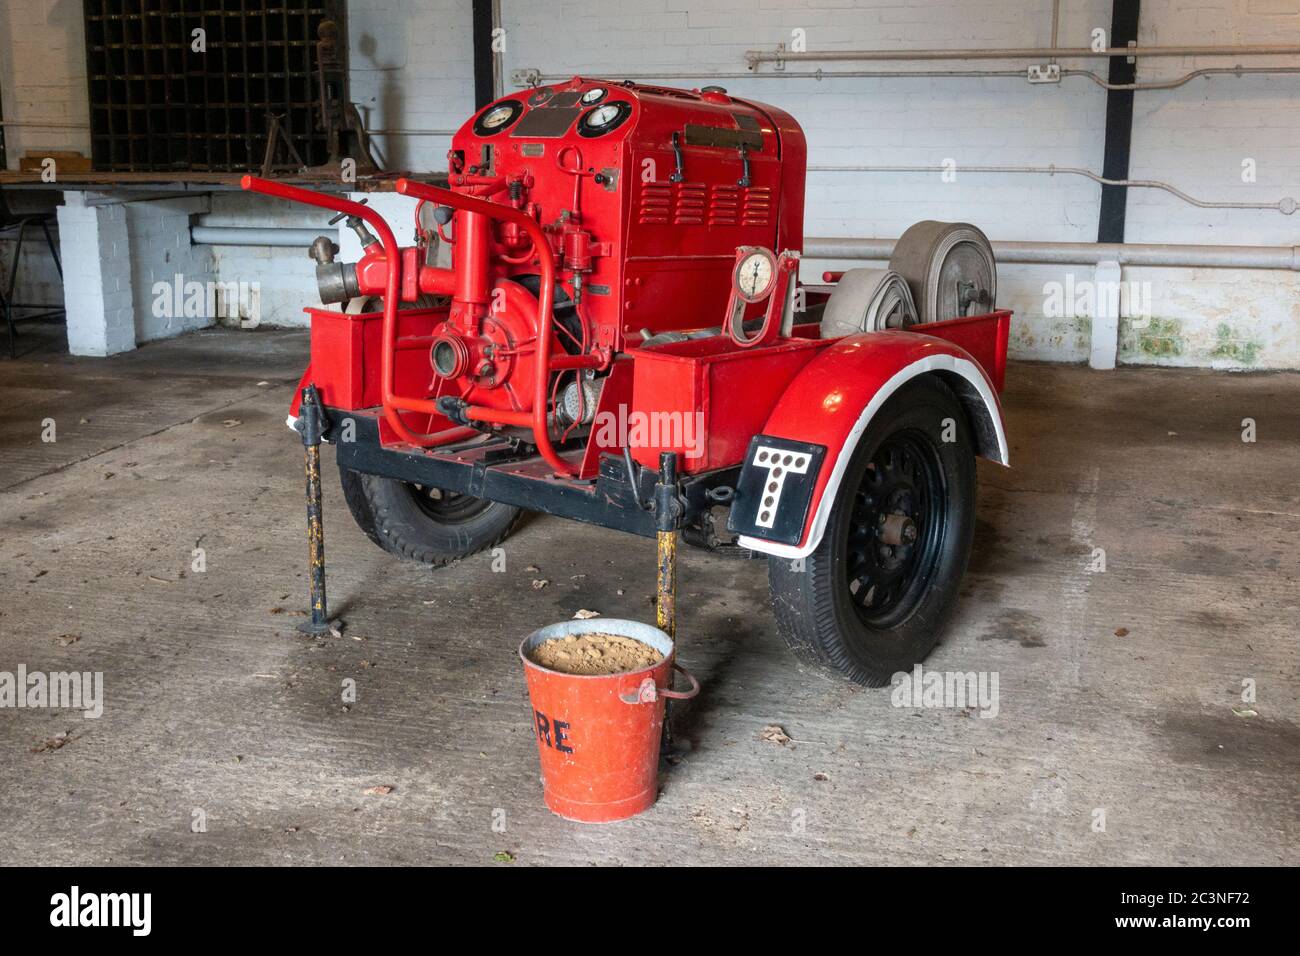 A Coventry Climax fire pump fire appliance on display in the vehicle garages, Bletchley Park, Bletchley, Buckinghamshire, Stock Photo